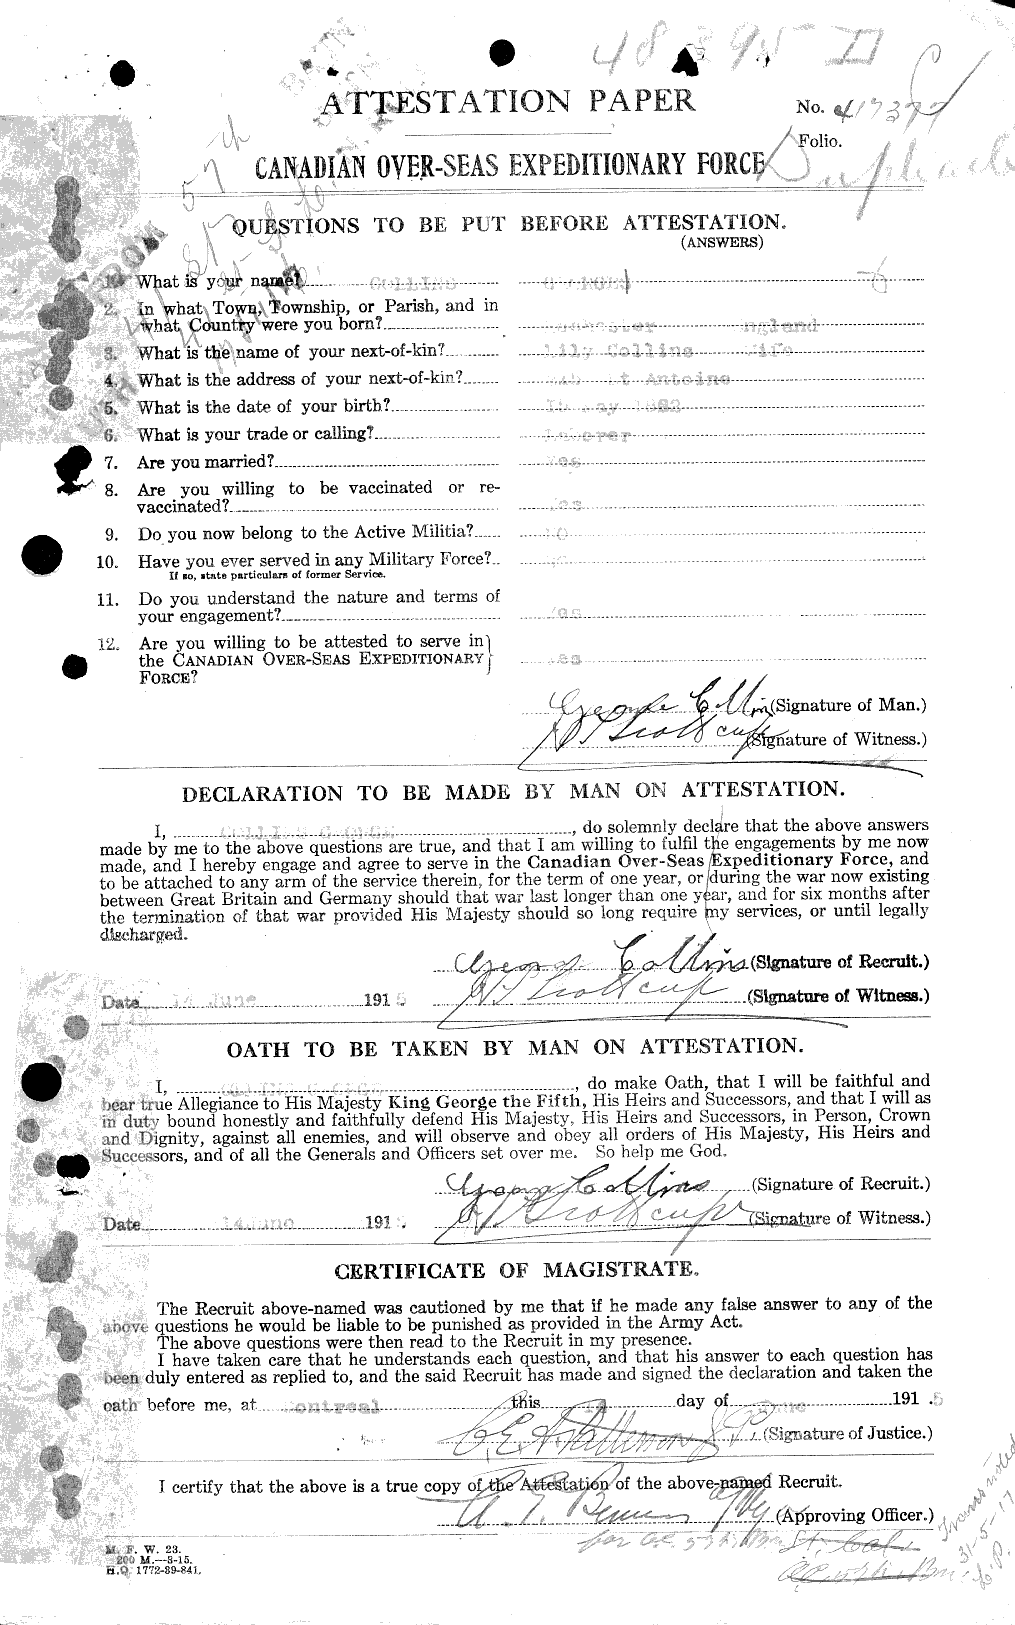 Personnel Records of the First World War - CEF 037849a